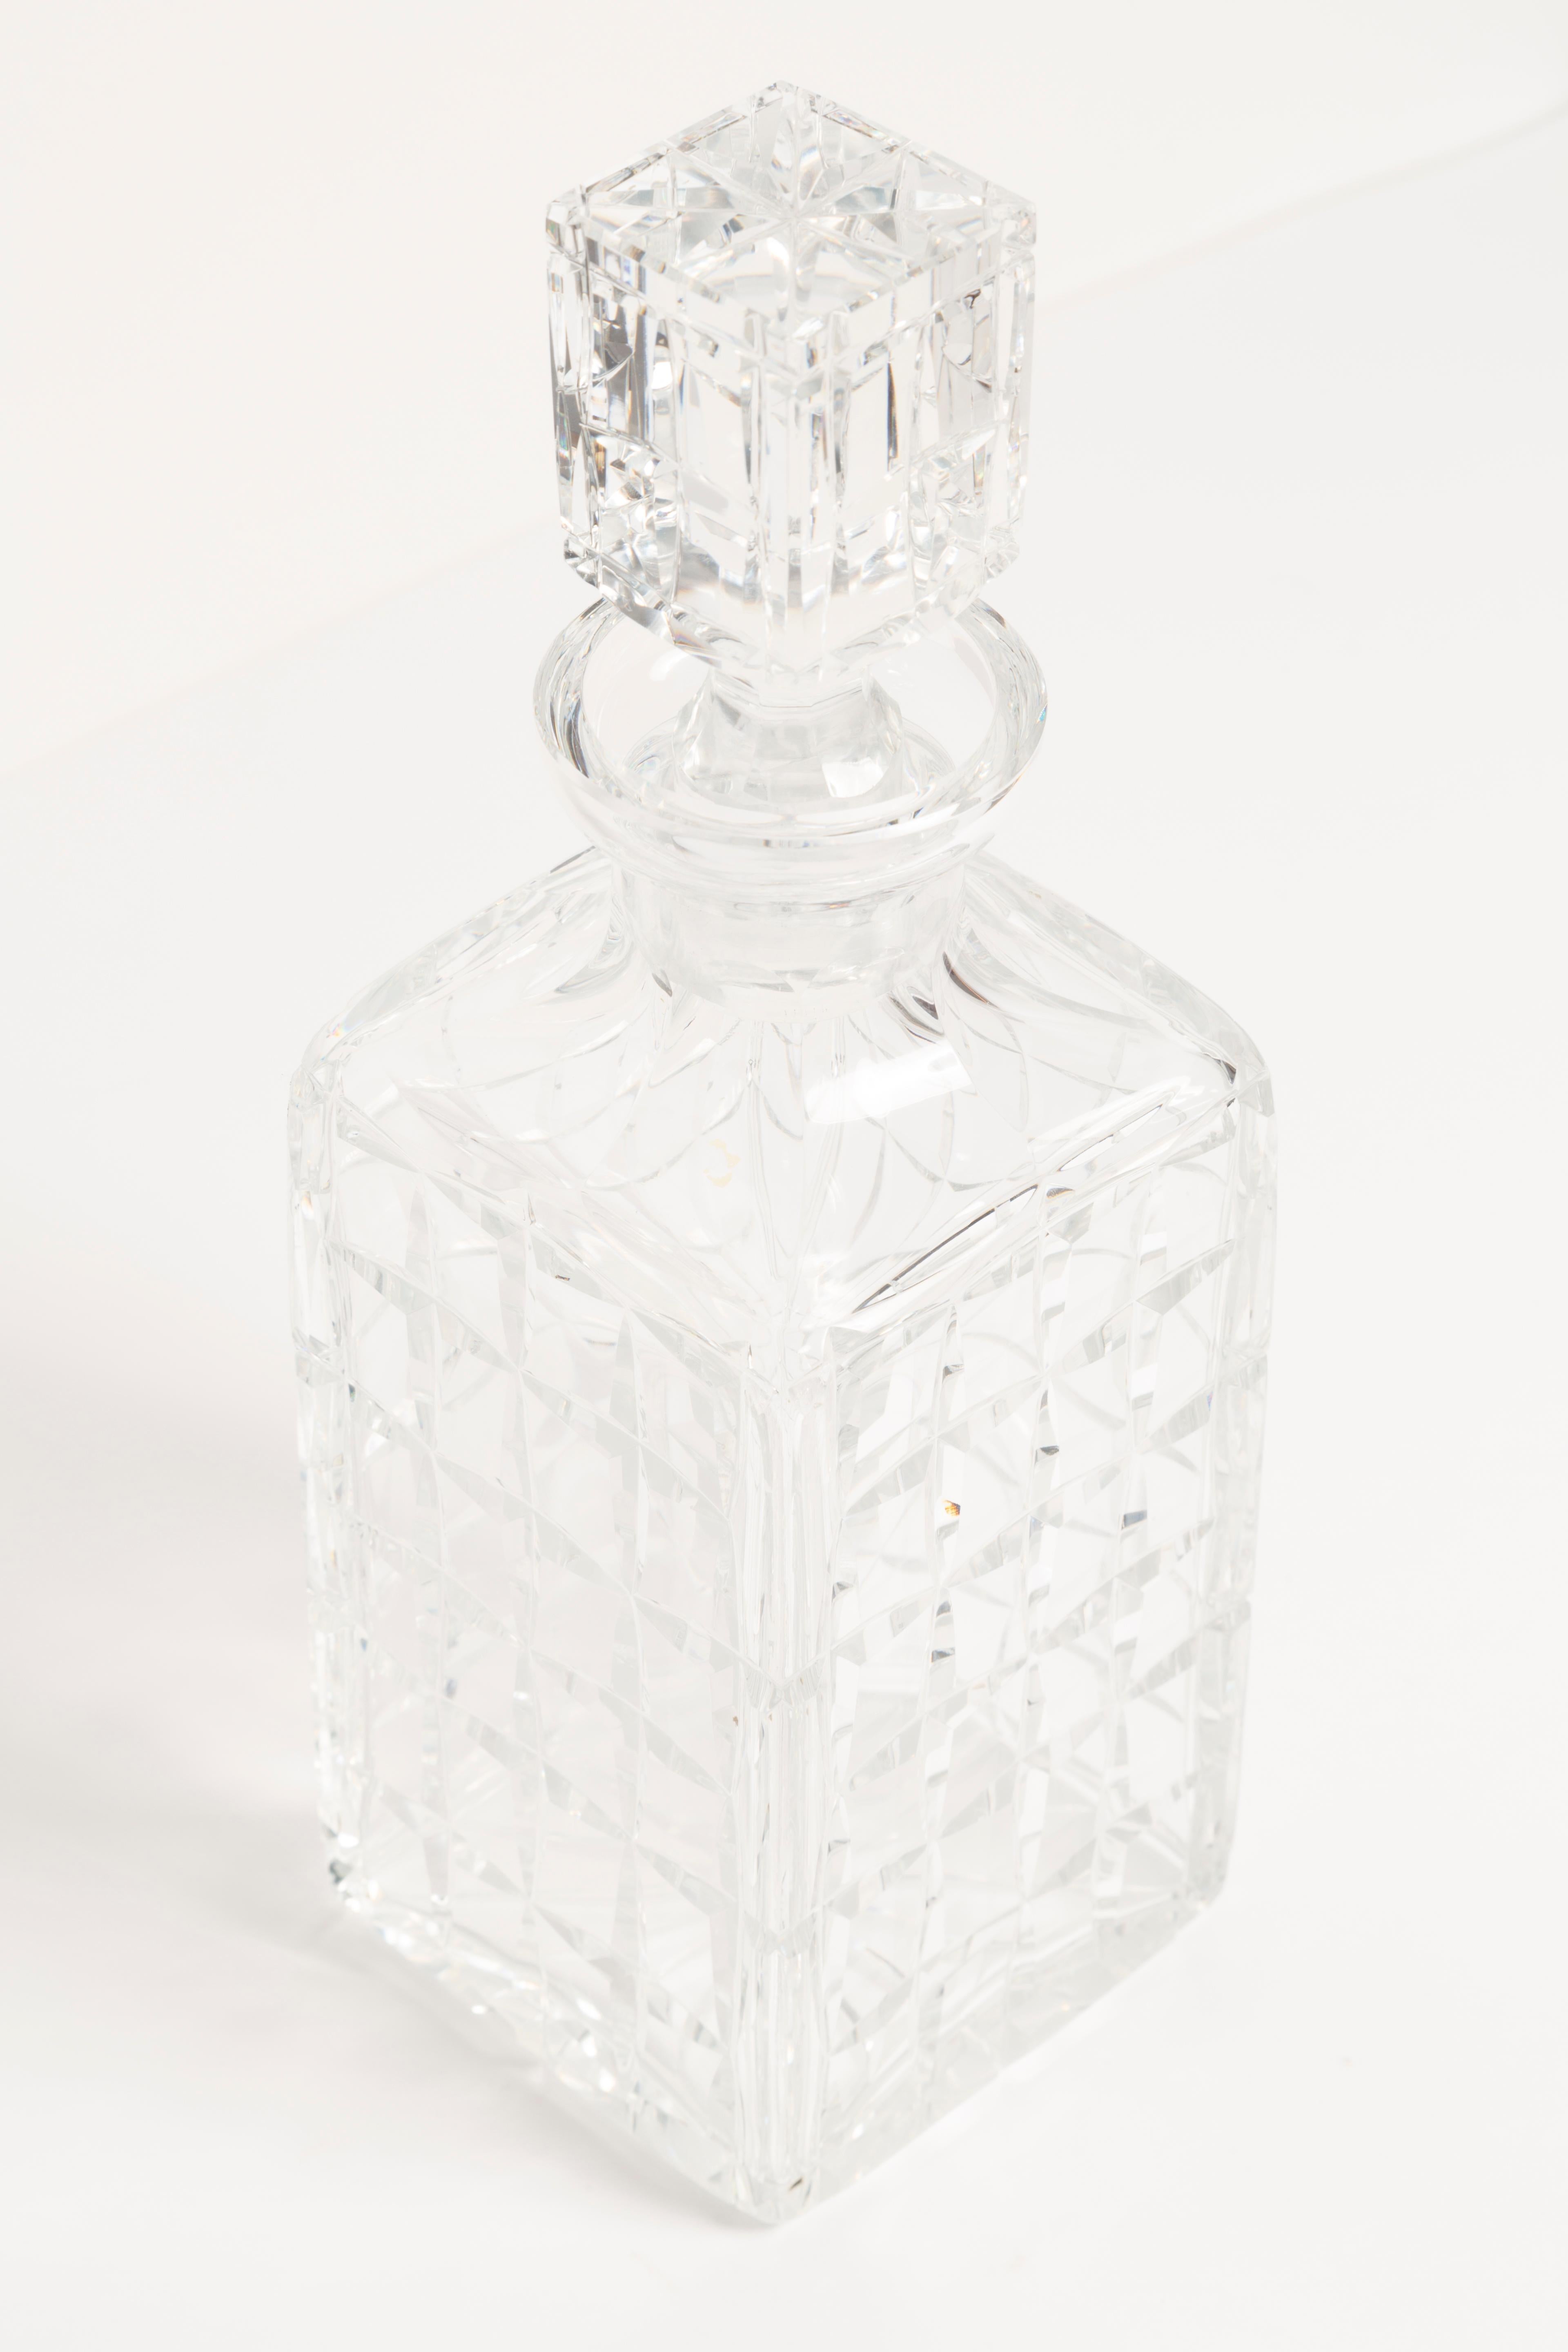 Mid-Century Transparent Crystal Glass Decanter with Stopper, Europe, 1960s For Sale 1